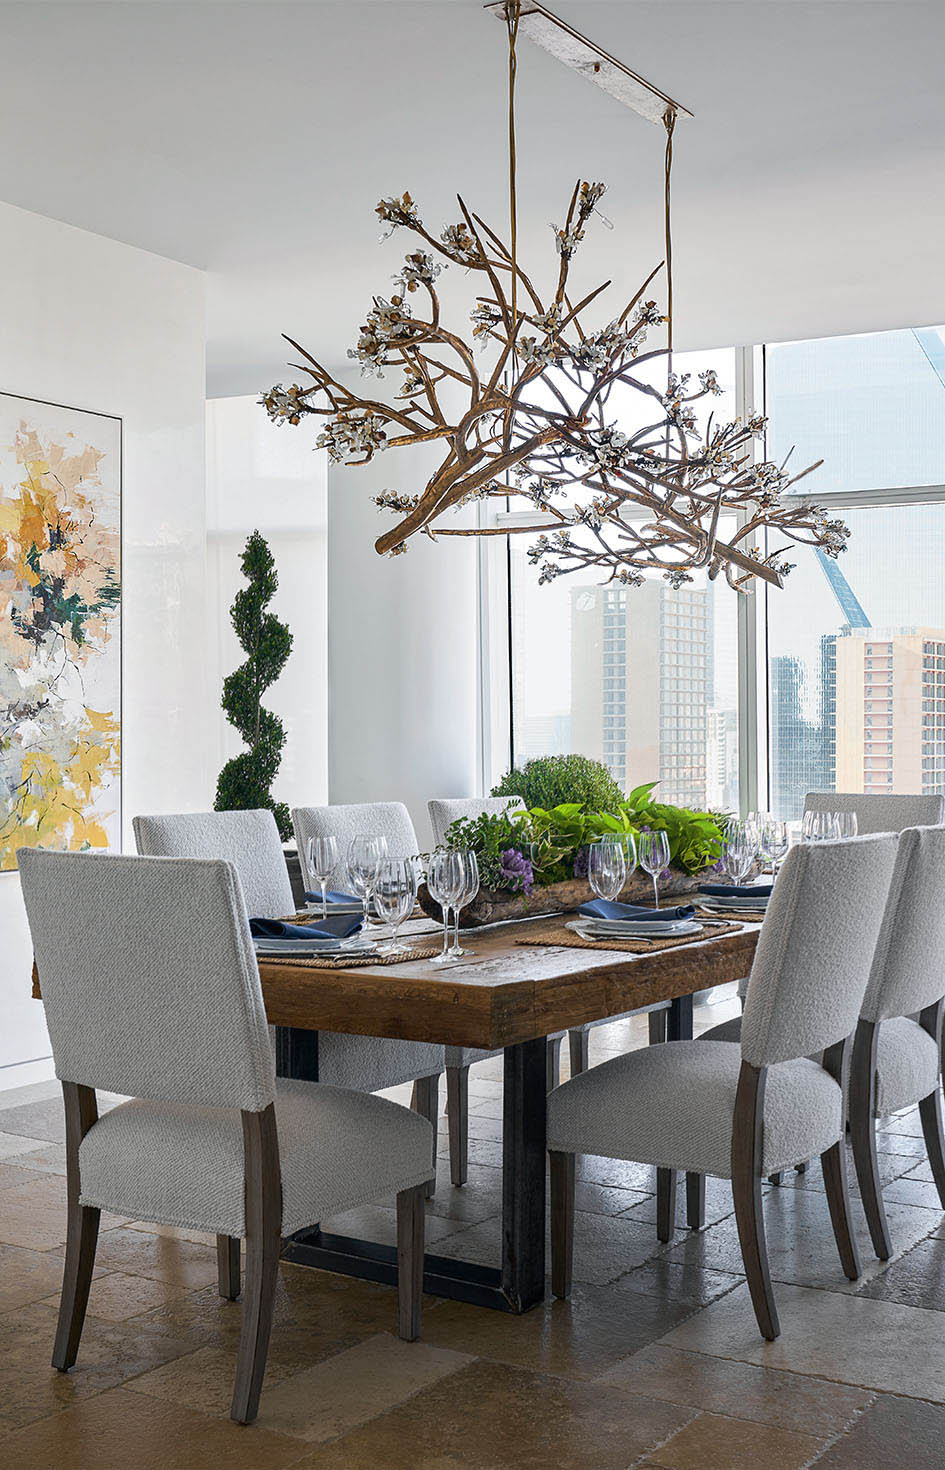 A Bernbaum/Magadini Architects modern comfortable contemporary in Museum Tower high-rise in downtown Dallas, Texas featuring a formal dining areas with extensive views of downtown.